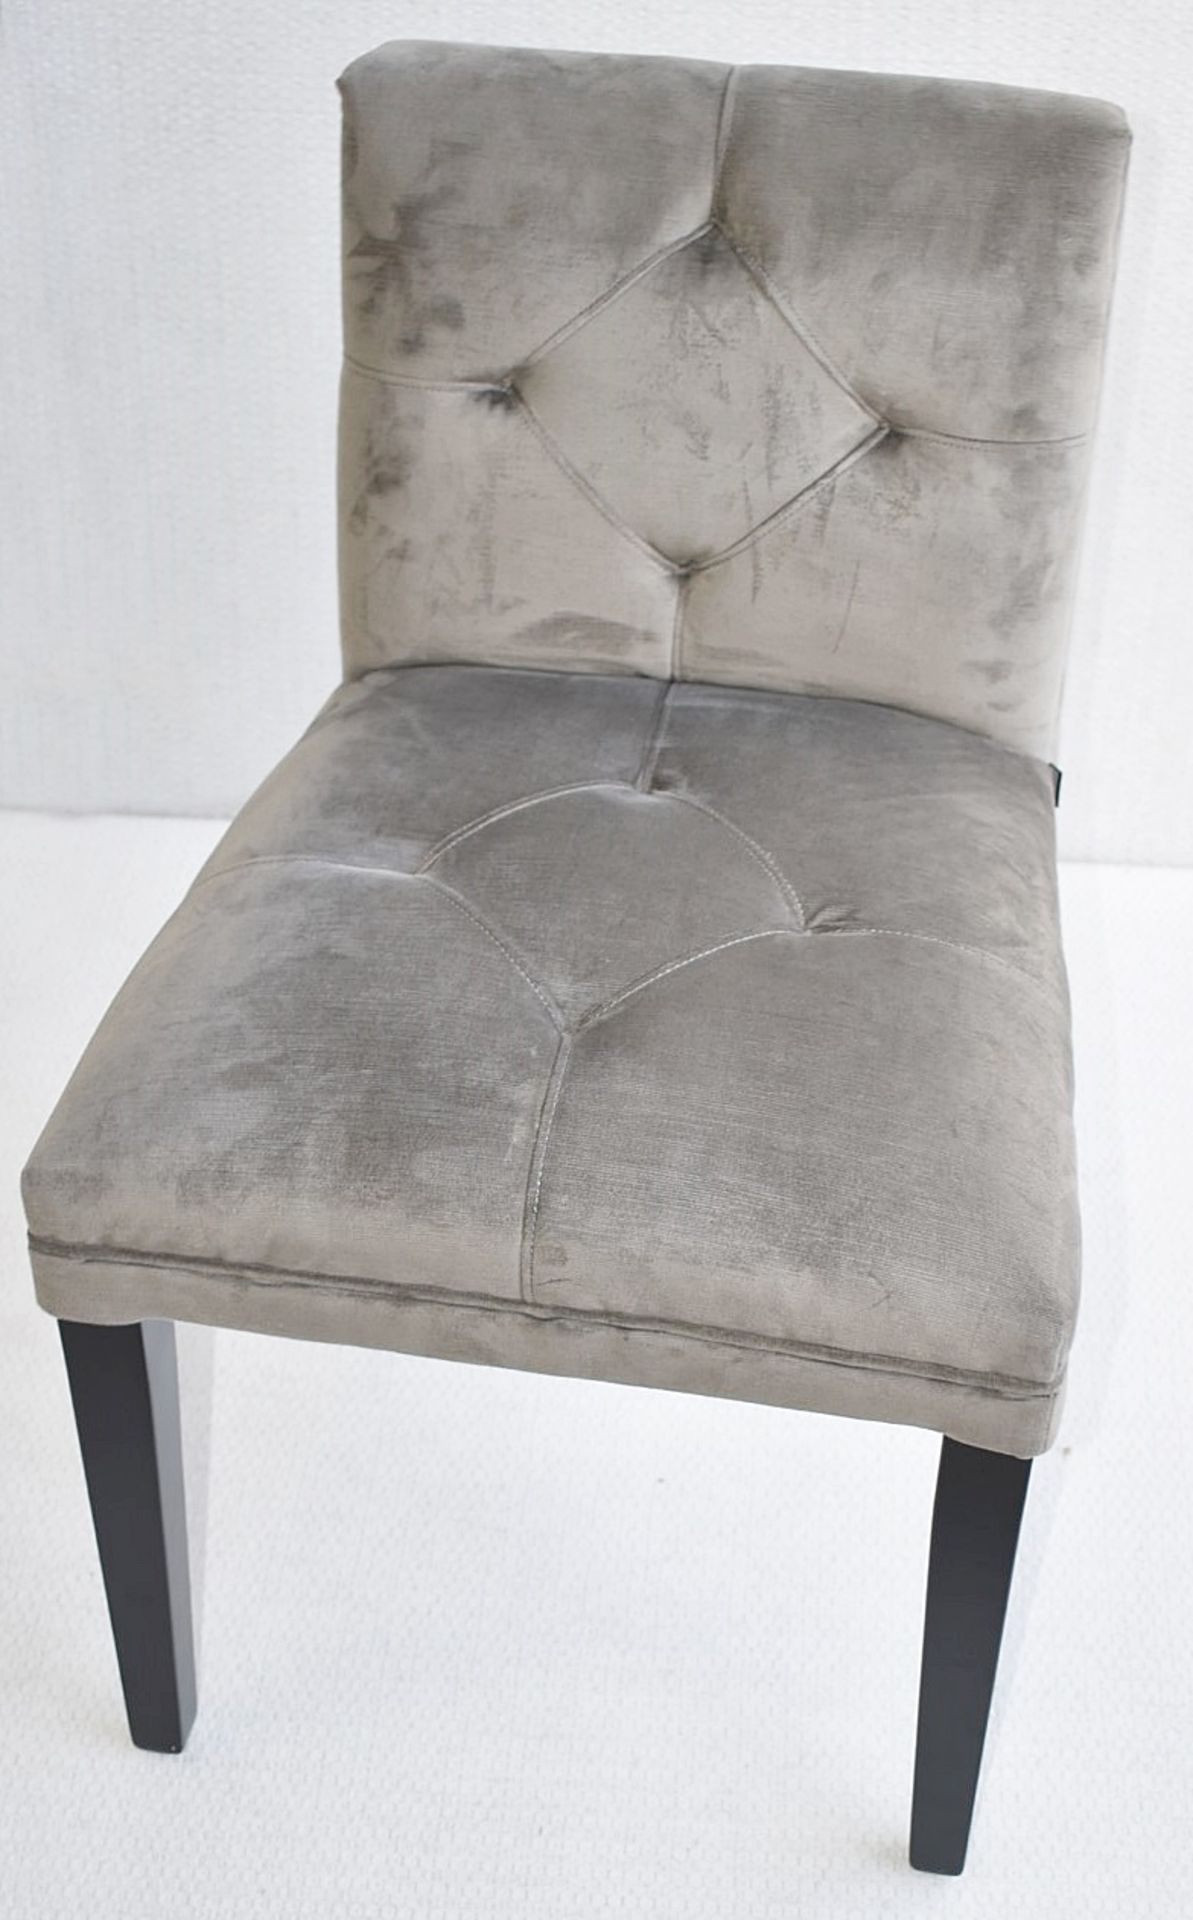 A Pair Of EICHHOLTZ 'Cesare' Luxury Button-back Dining Chairs in Granite Grey - Original RRP £1,160 - Image 3 of 10